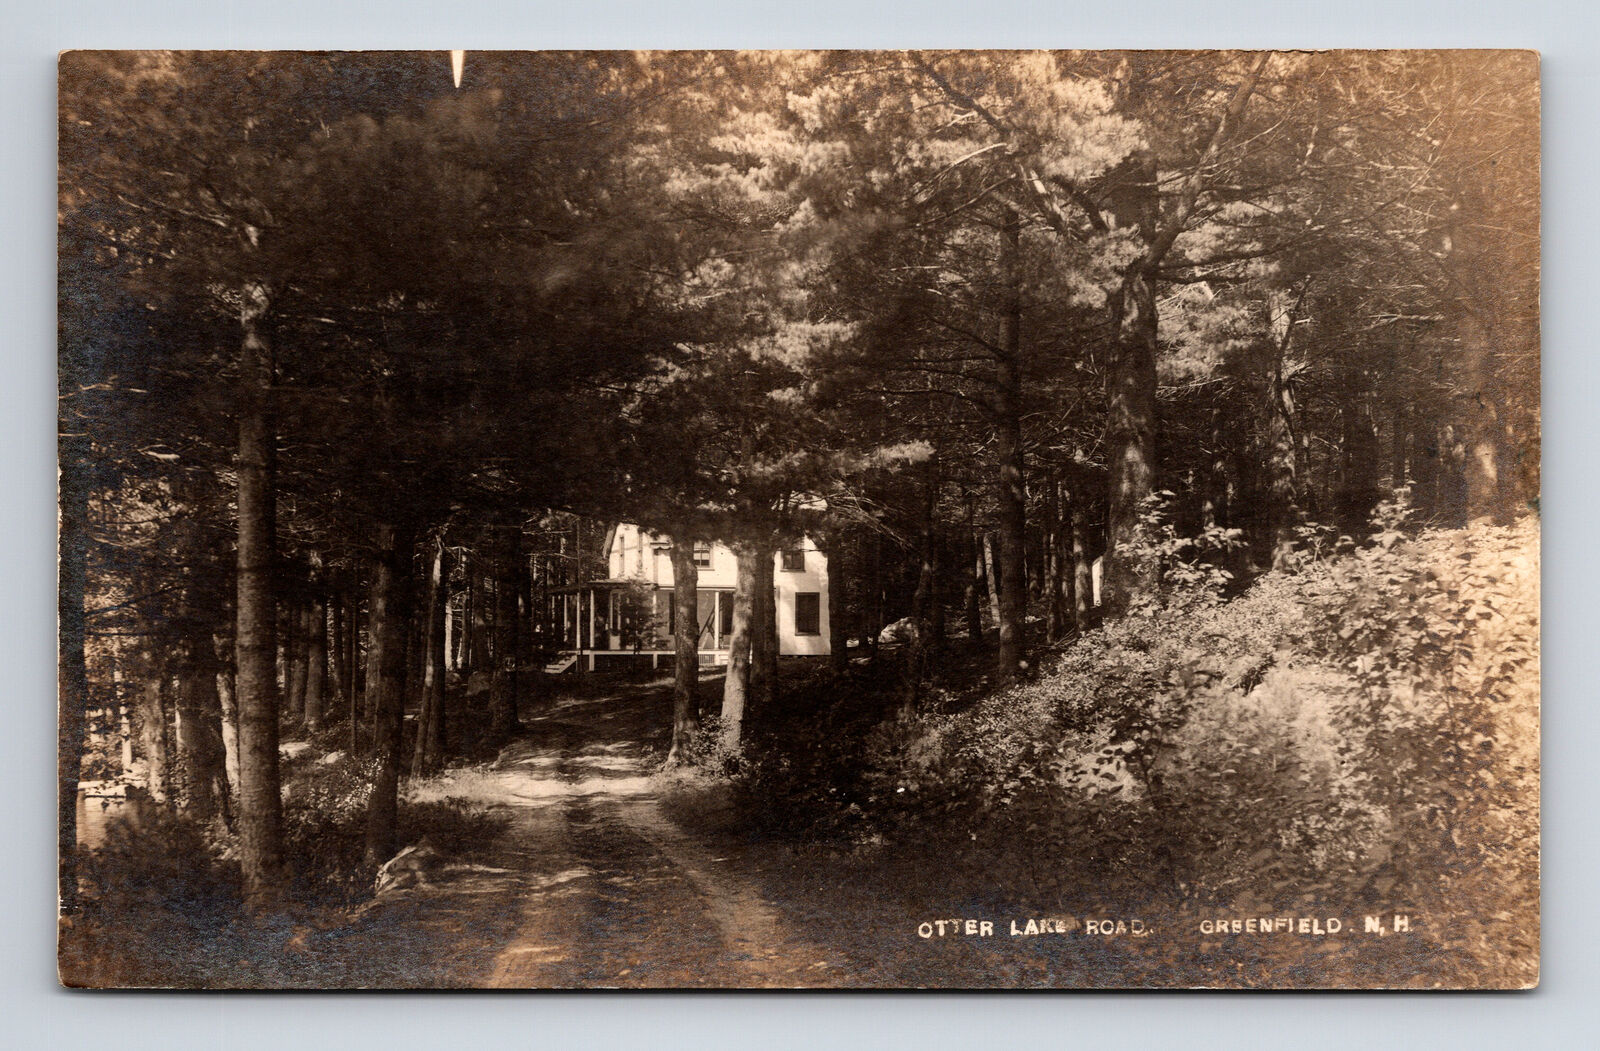 1920 RPPC Scenic Wooded Otter Lake Road Greenfield NH Postcard